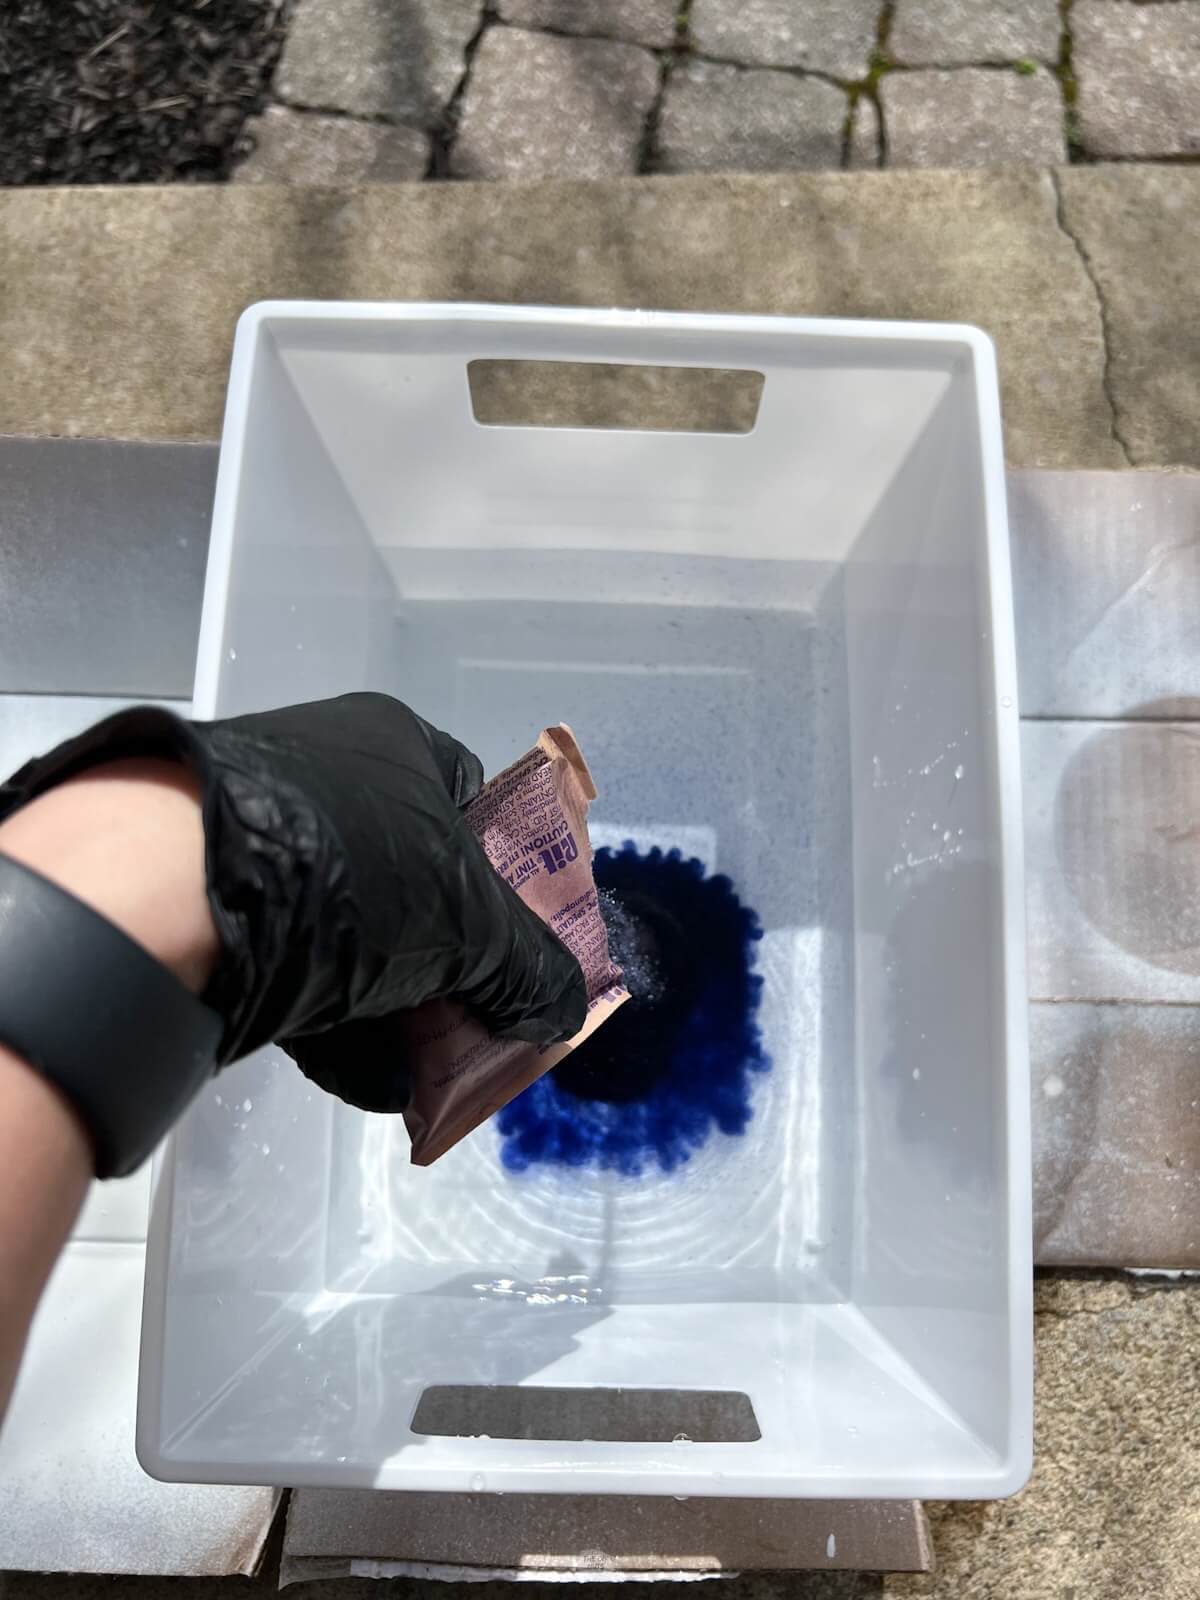 hand wearing glove pouring powder blue dye into water.